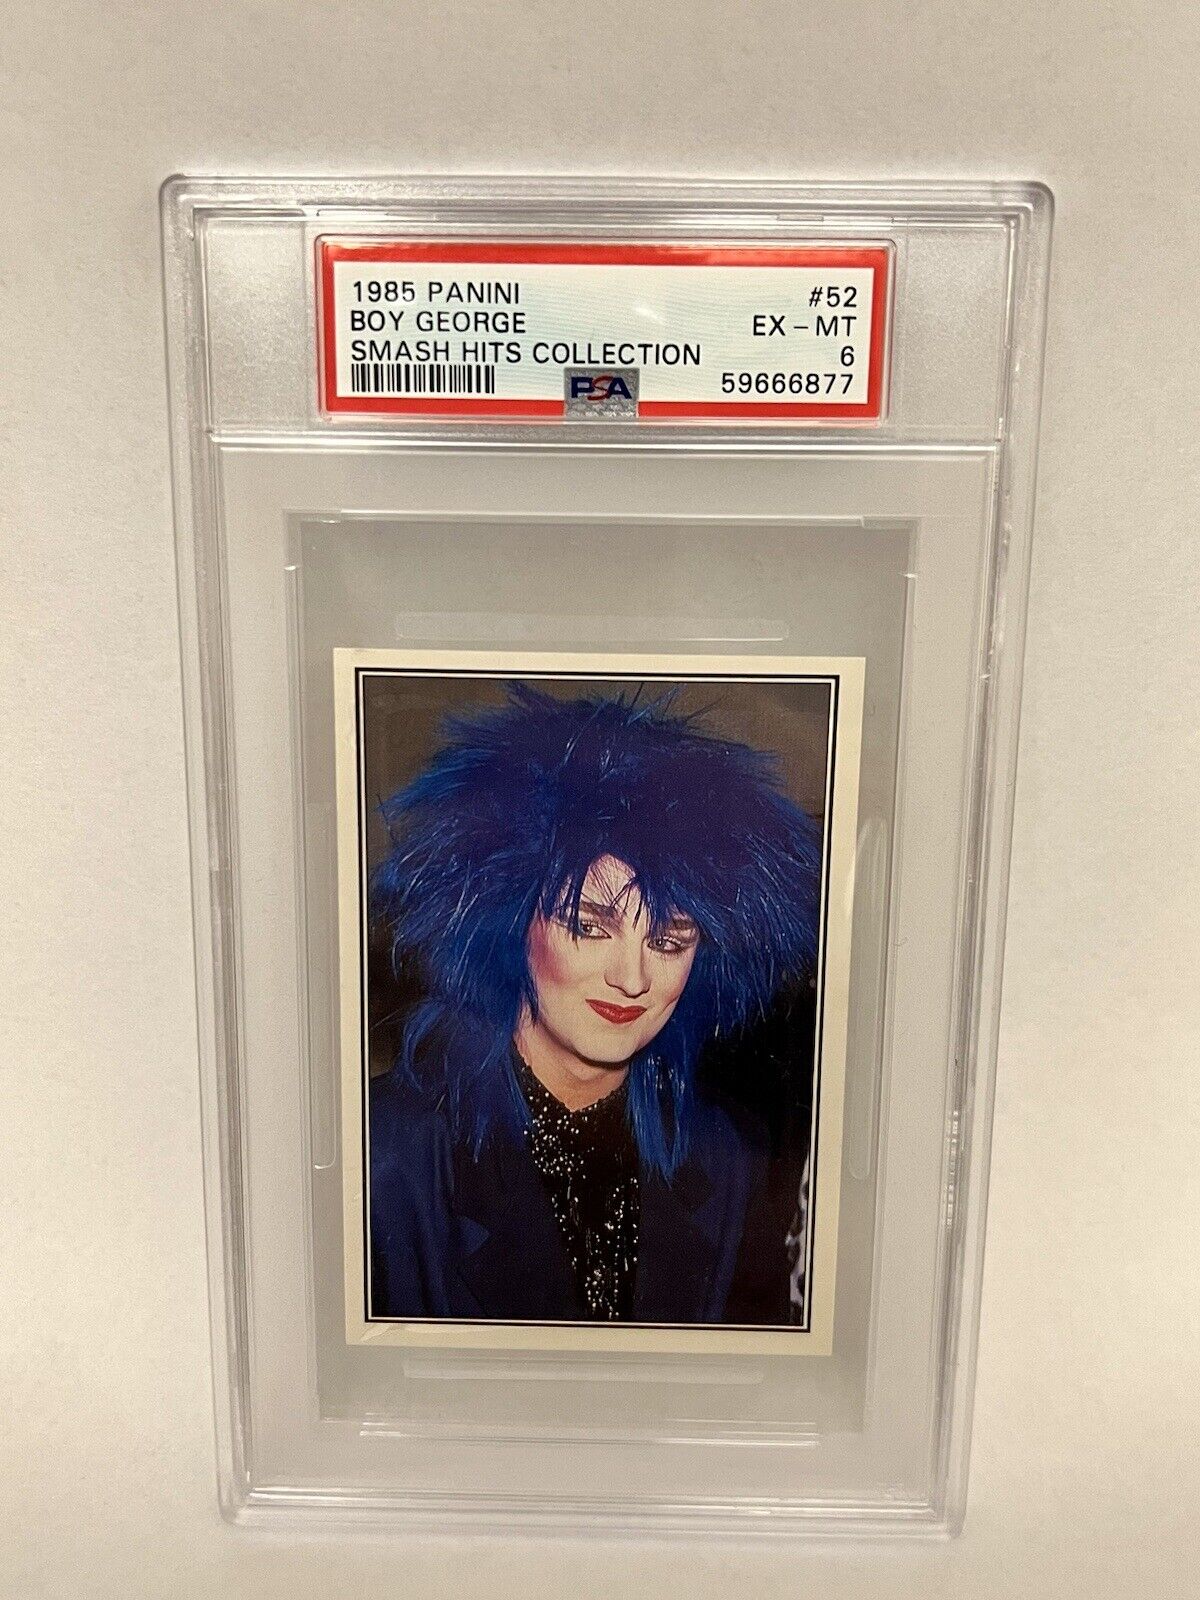 1985 Boy George Panini Smash Hits Collection # PSA Music Rookie Card Concert